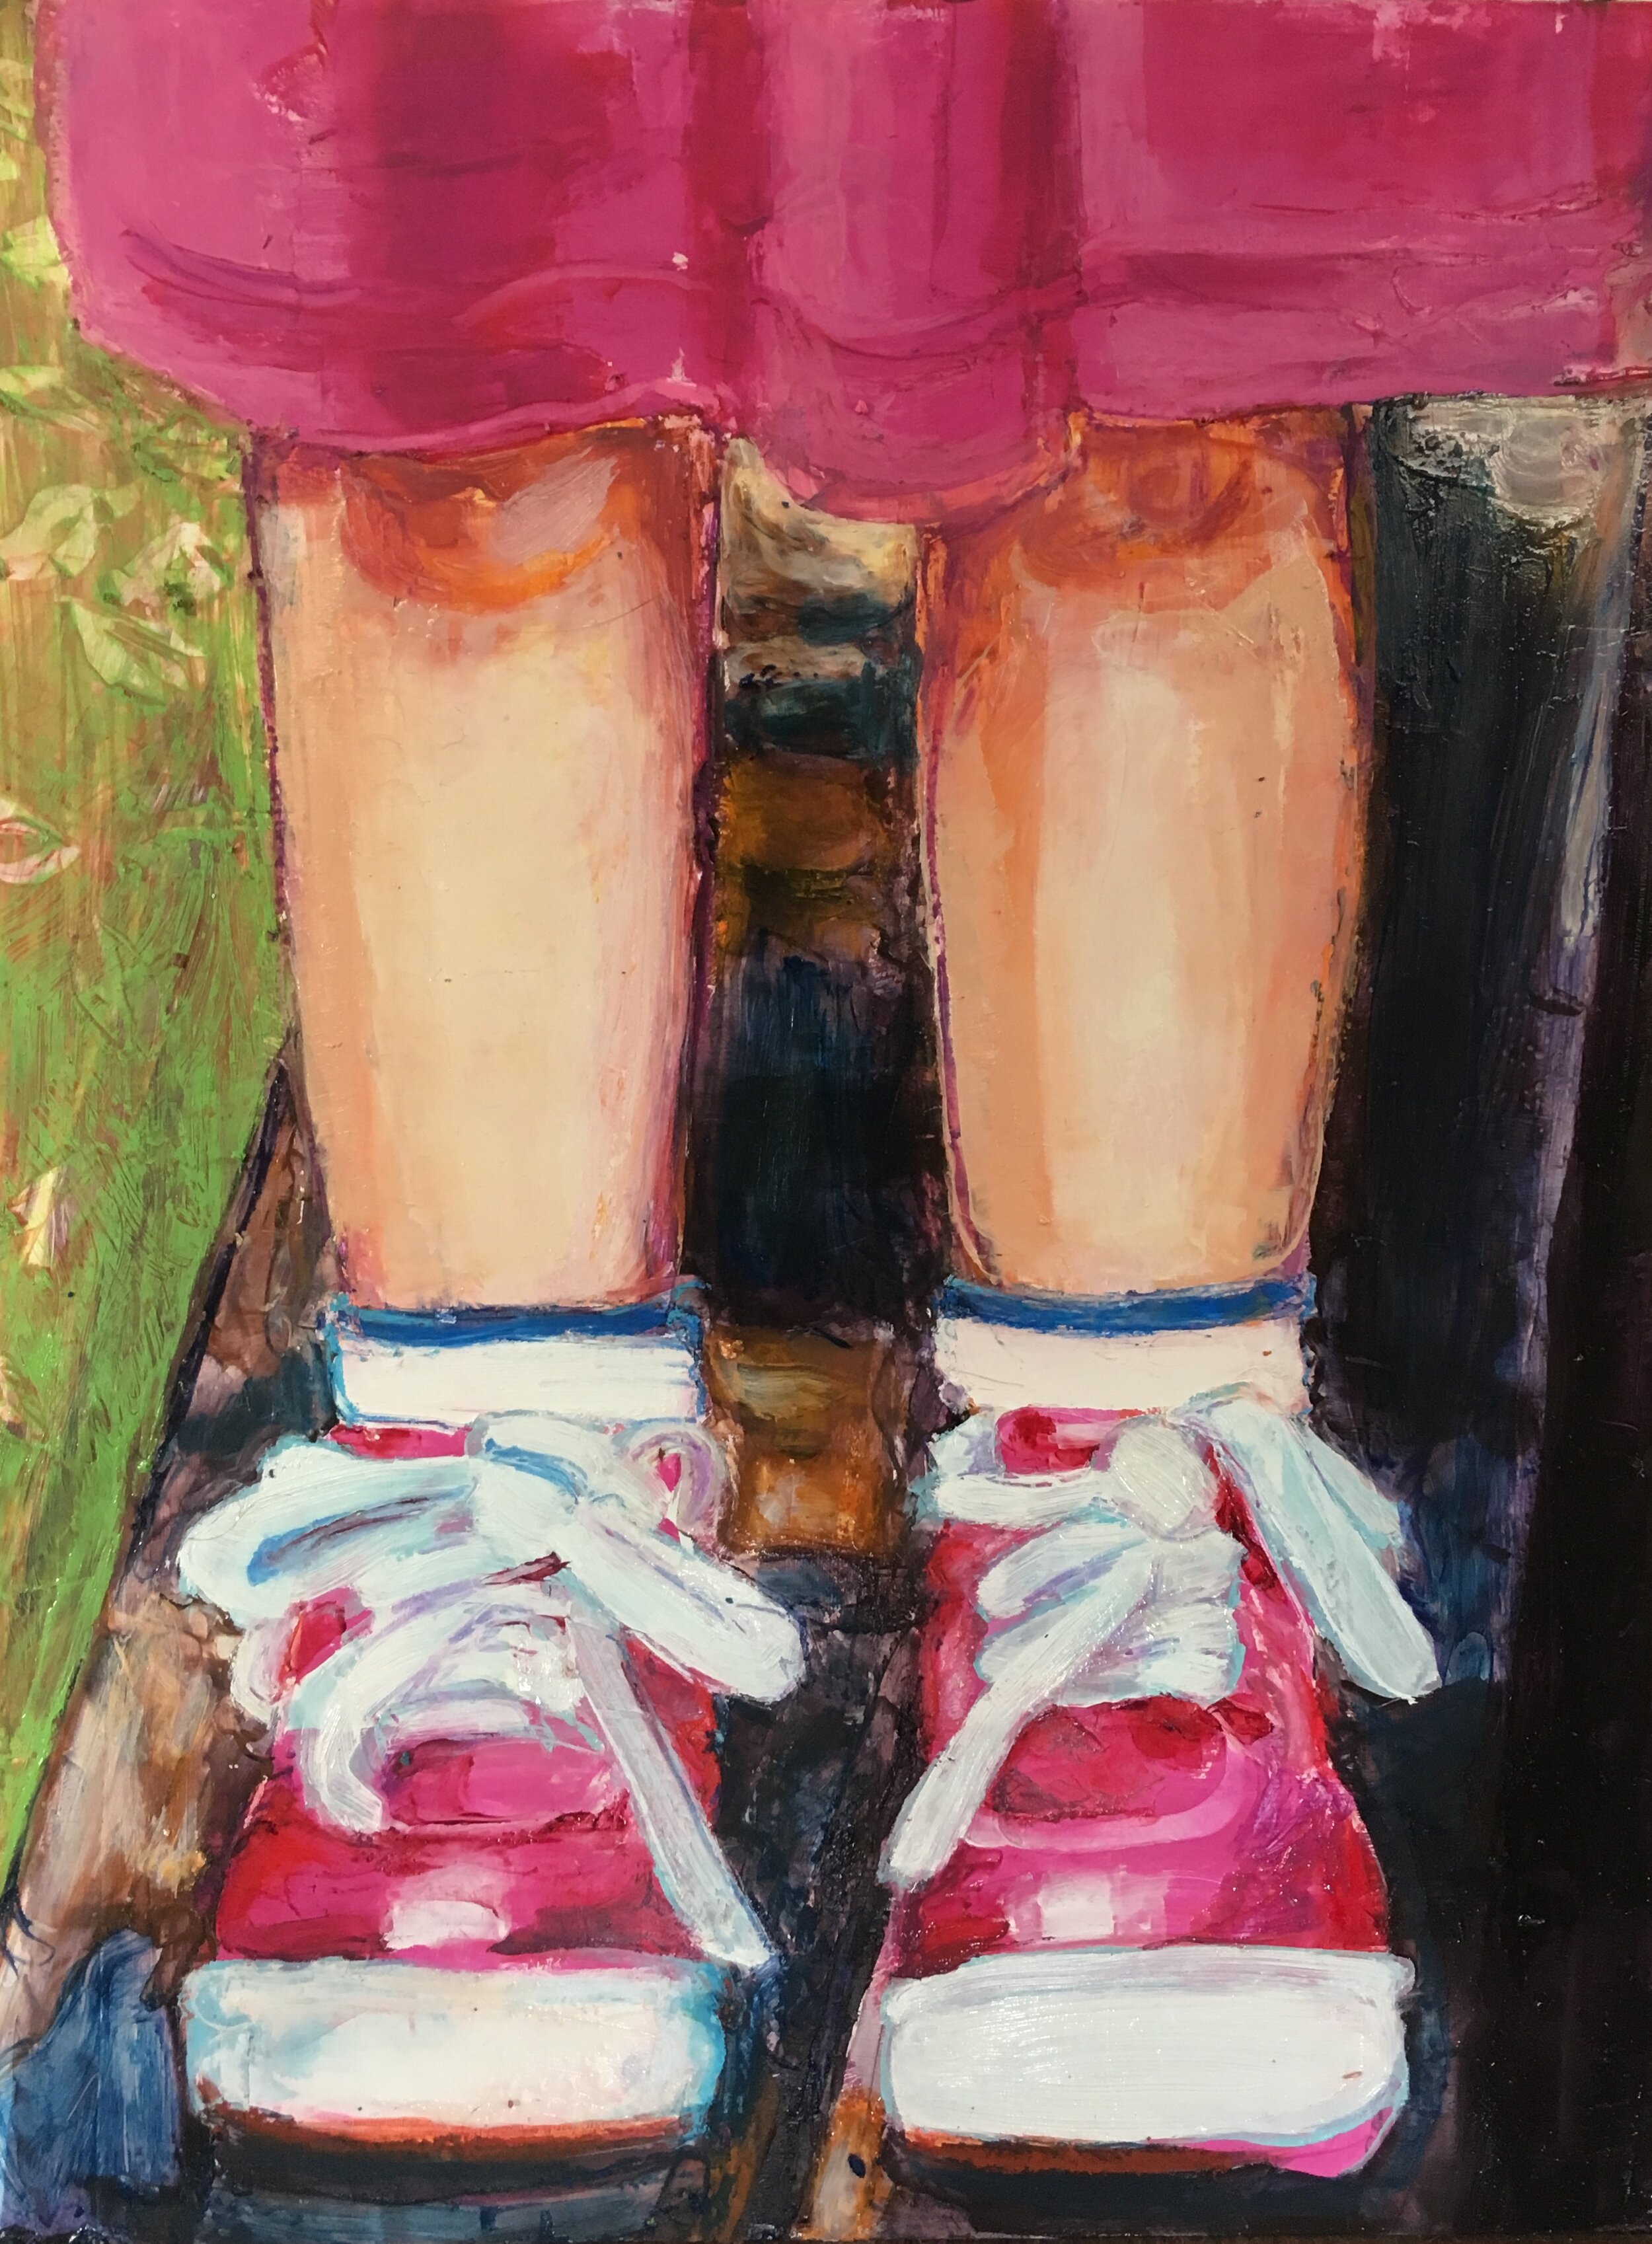 Little Girl Sneakers (2019) Oil, Acrylic, Pastel and Colored Pencil on Panel. 8.5"x11"